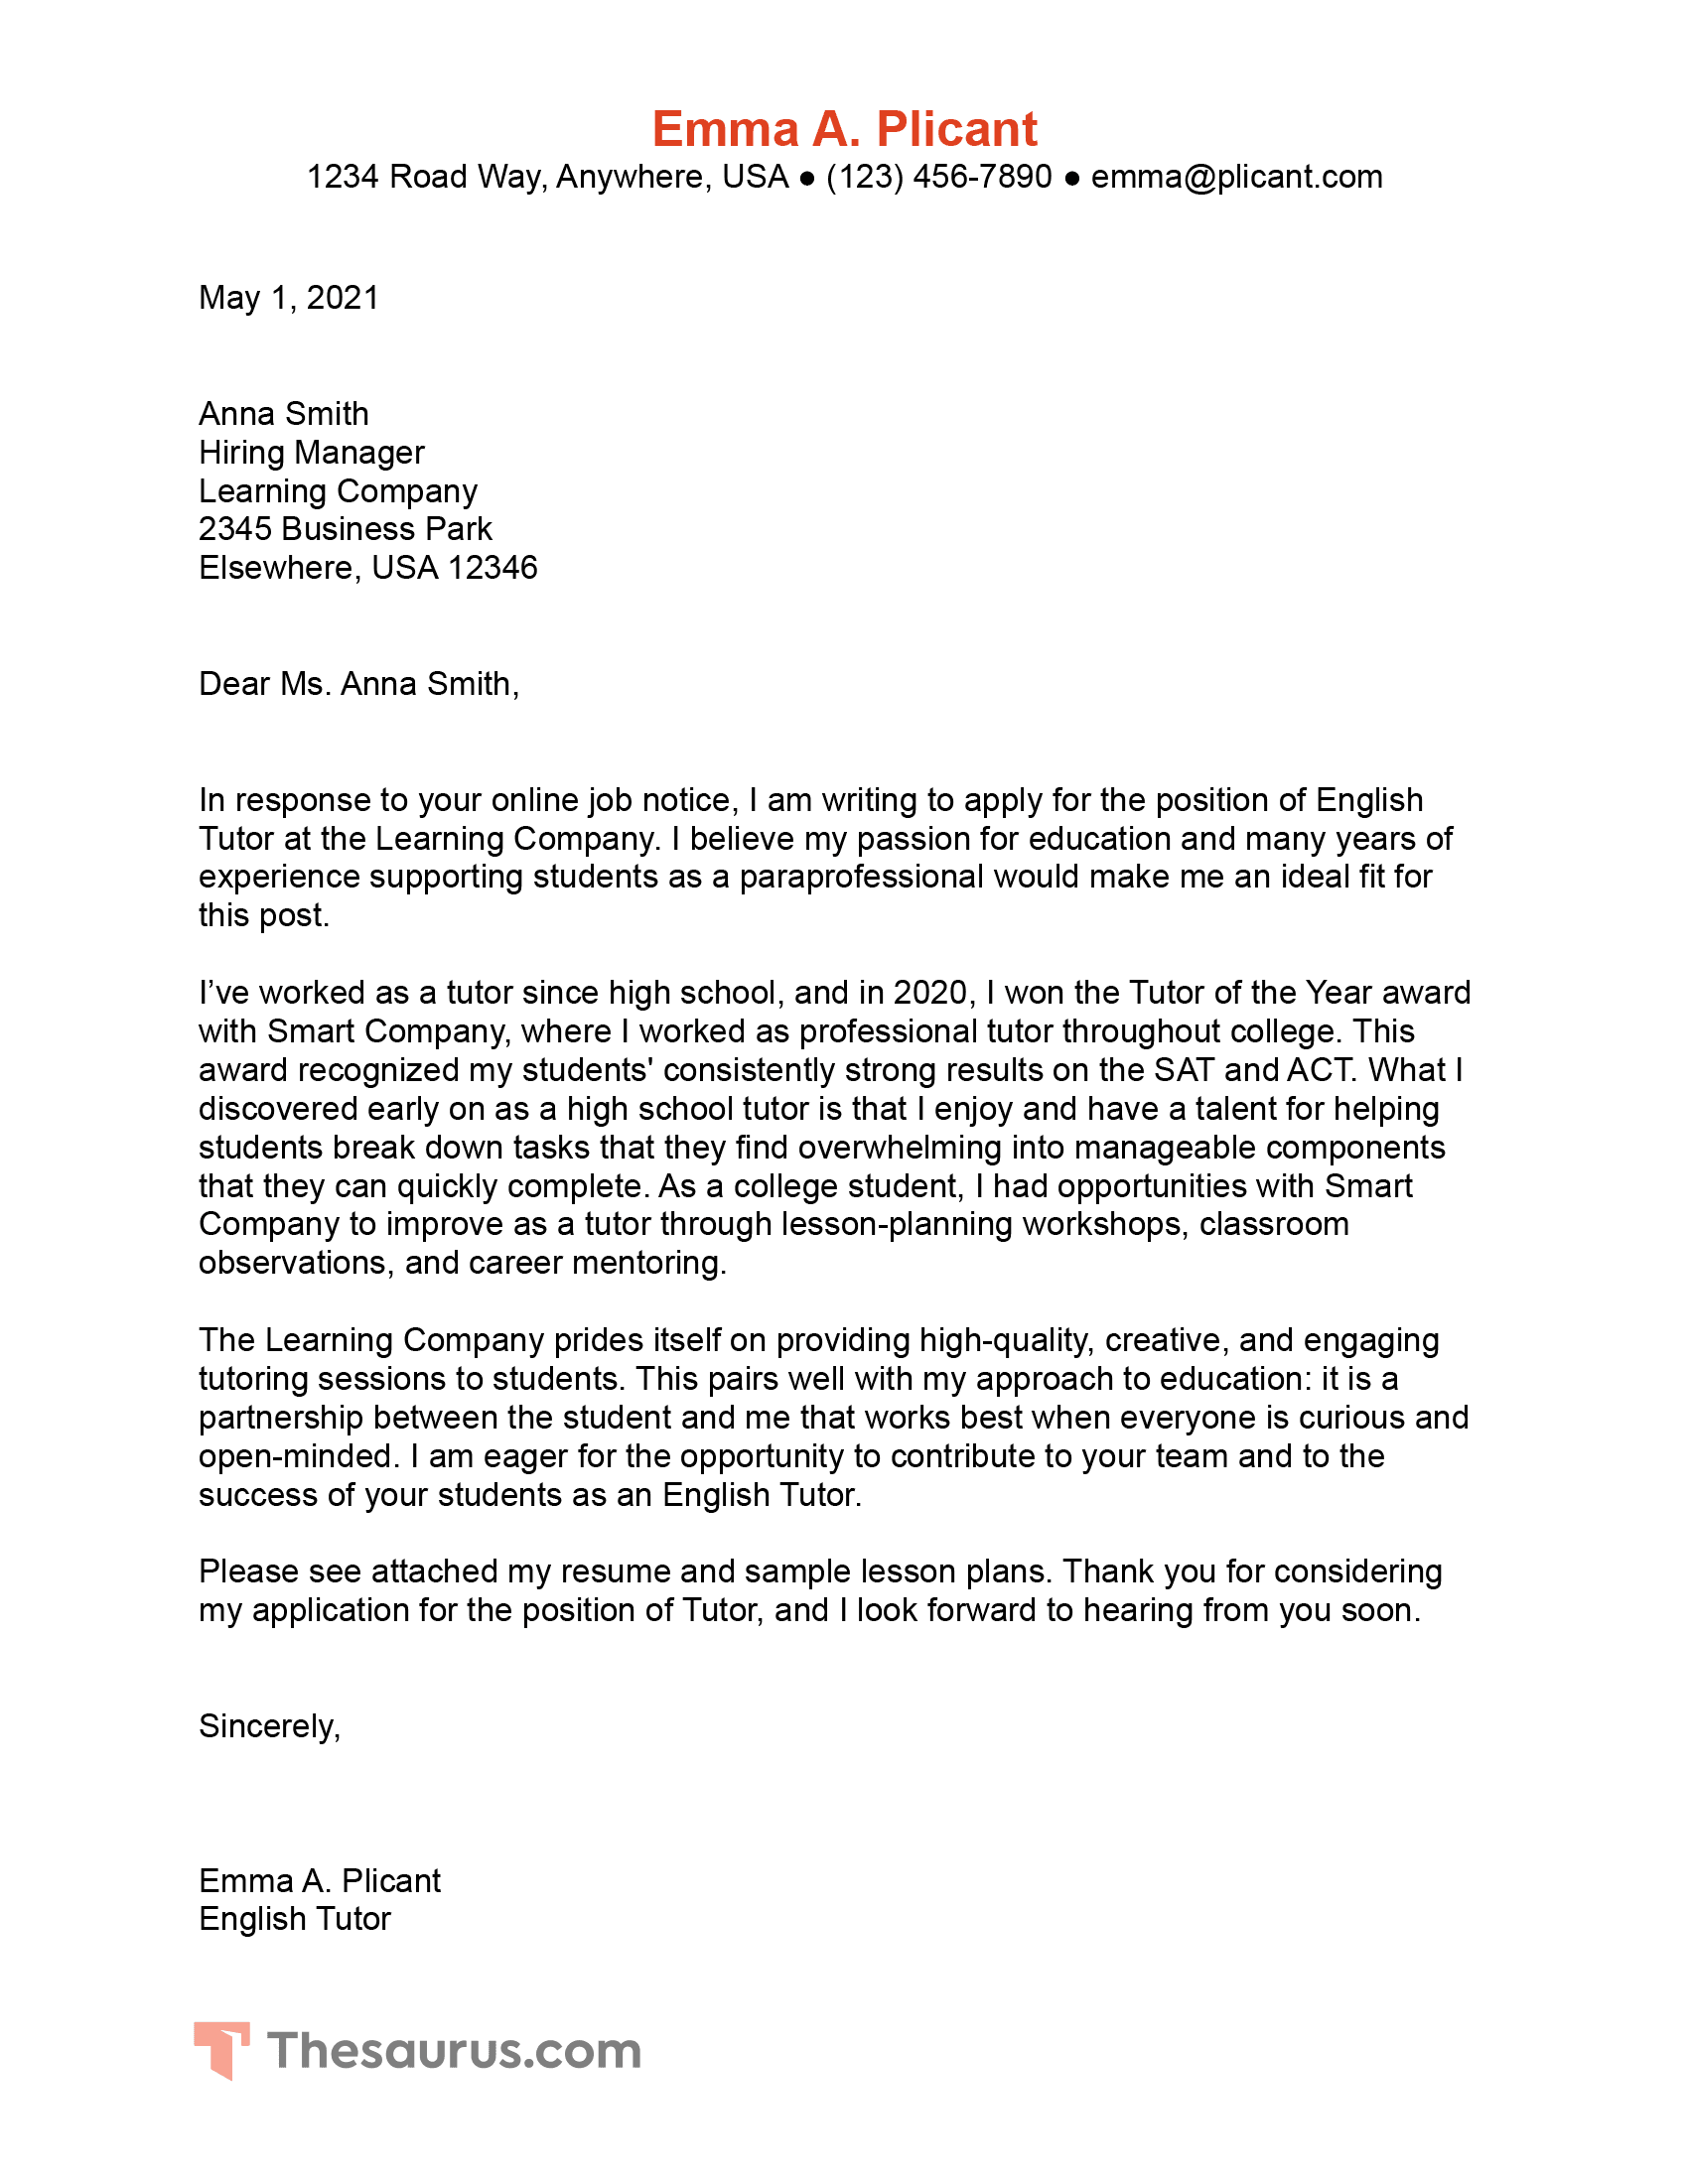 application letter heading example